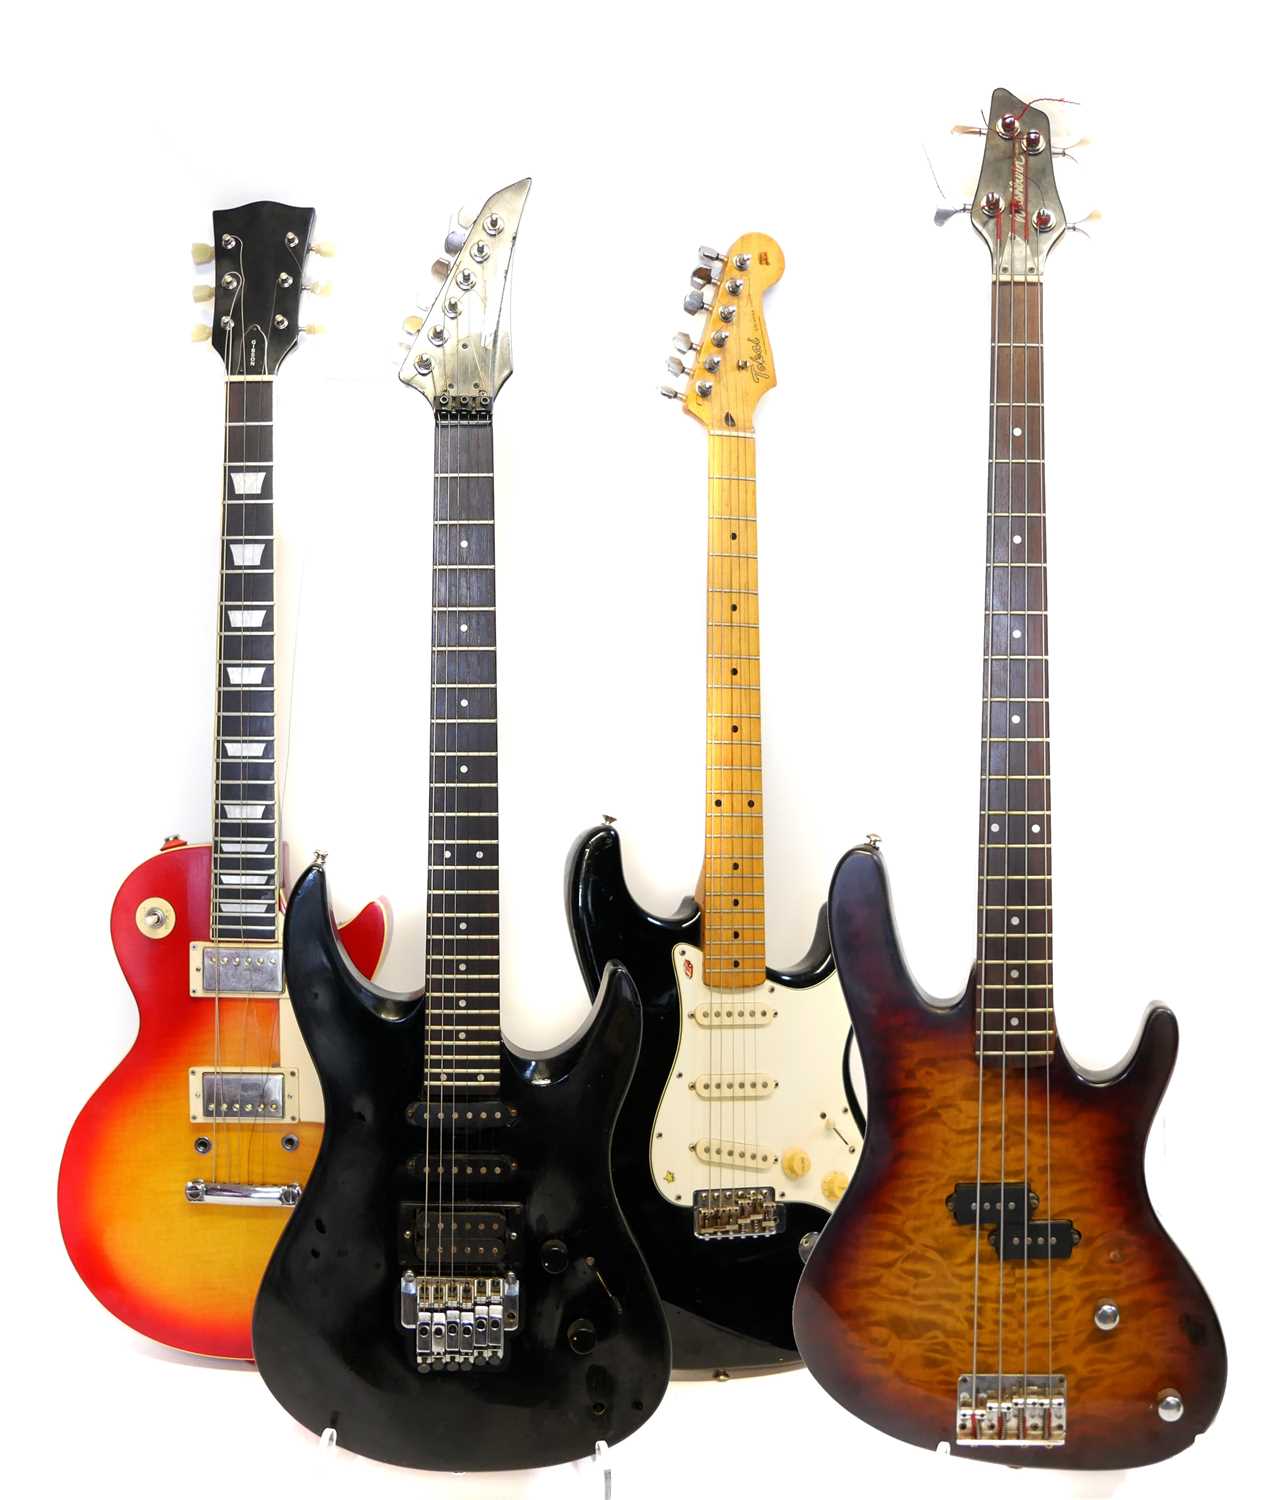 Three Electric Guitars and a Bass Guitar